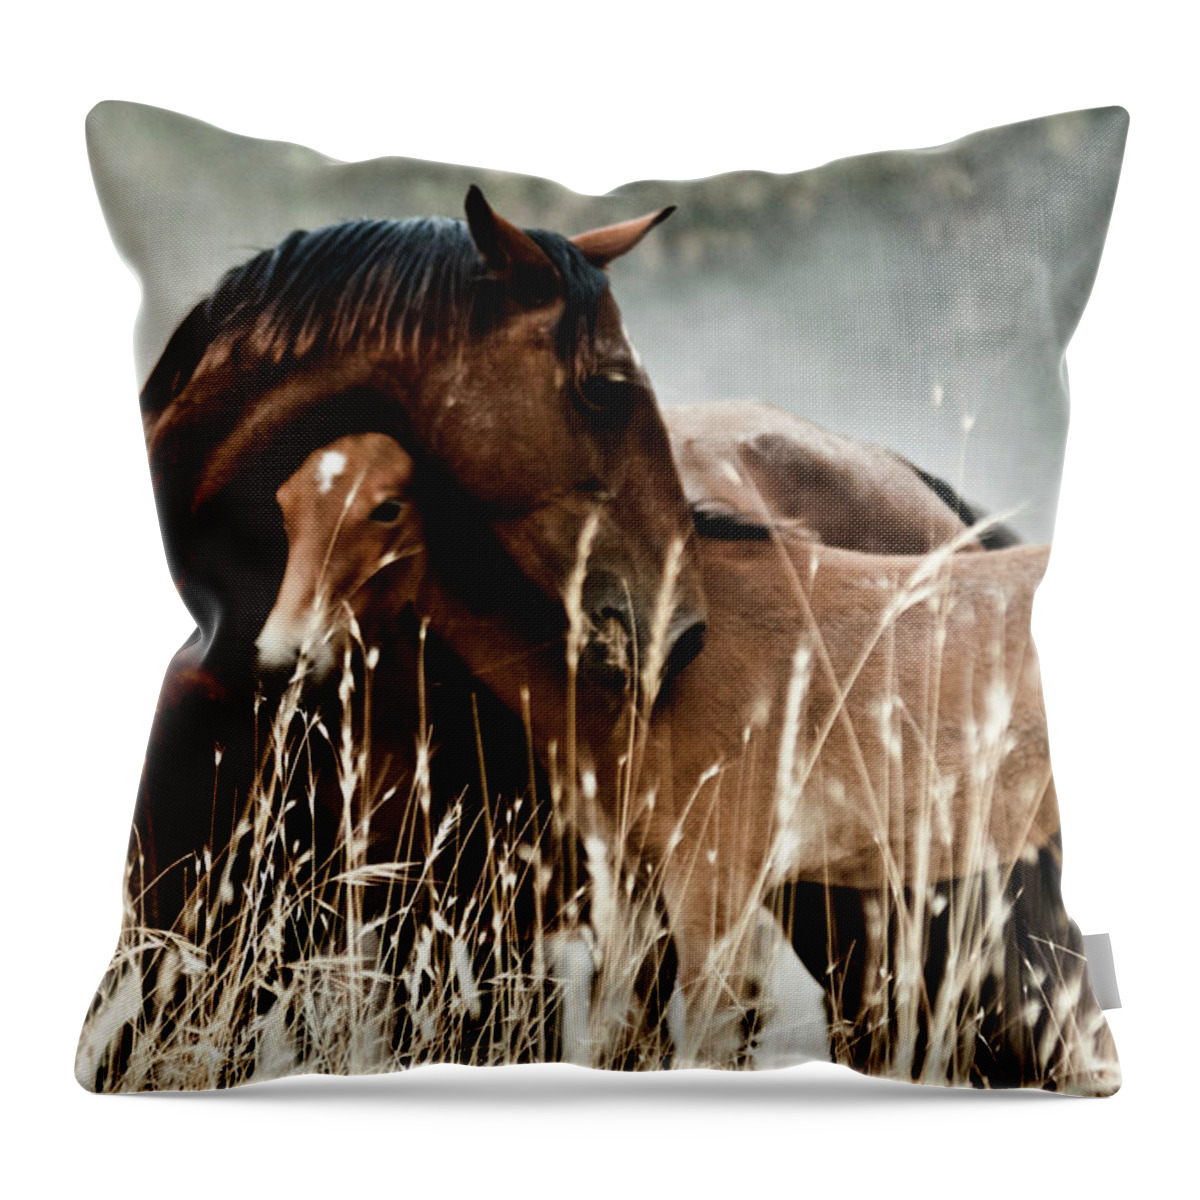 Horse Throw Pillow featuring the photograph Horse With Foal by Fran Maldonado